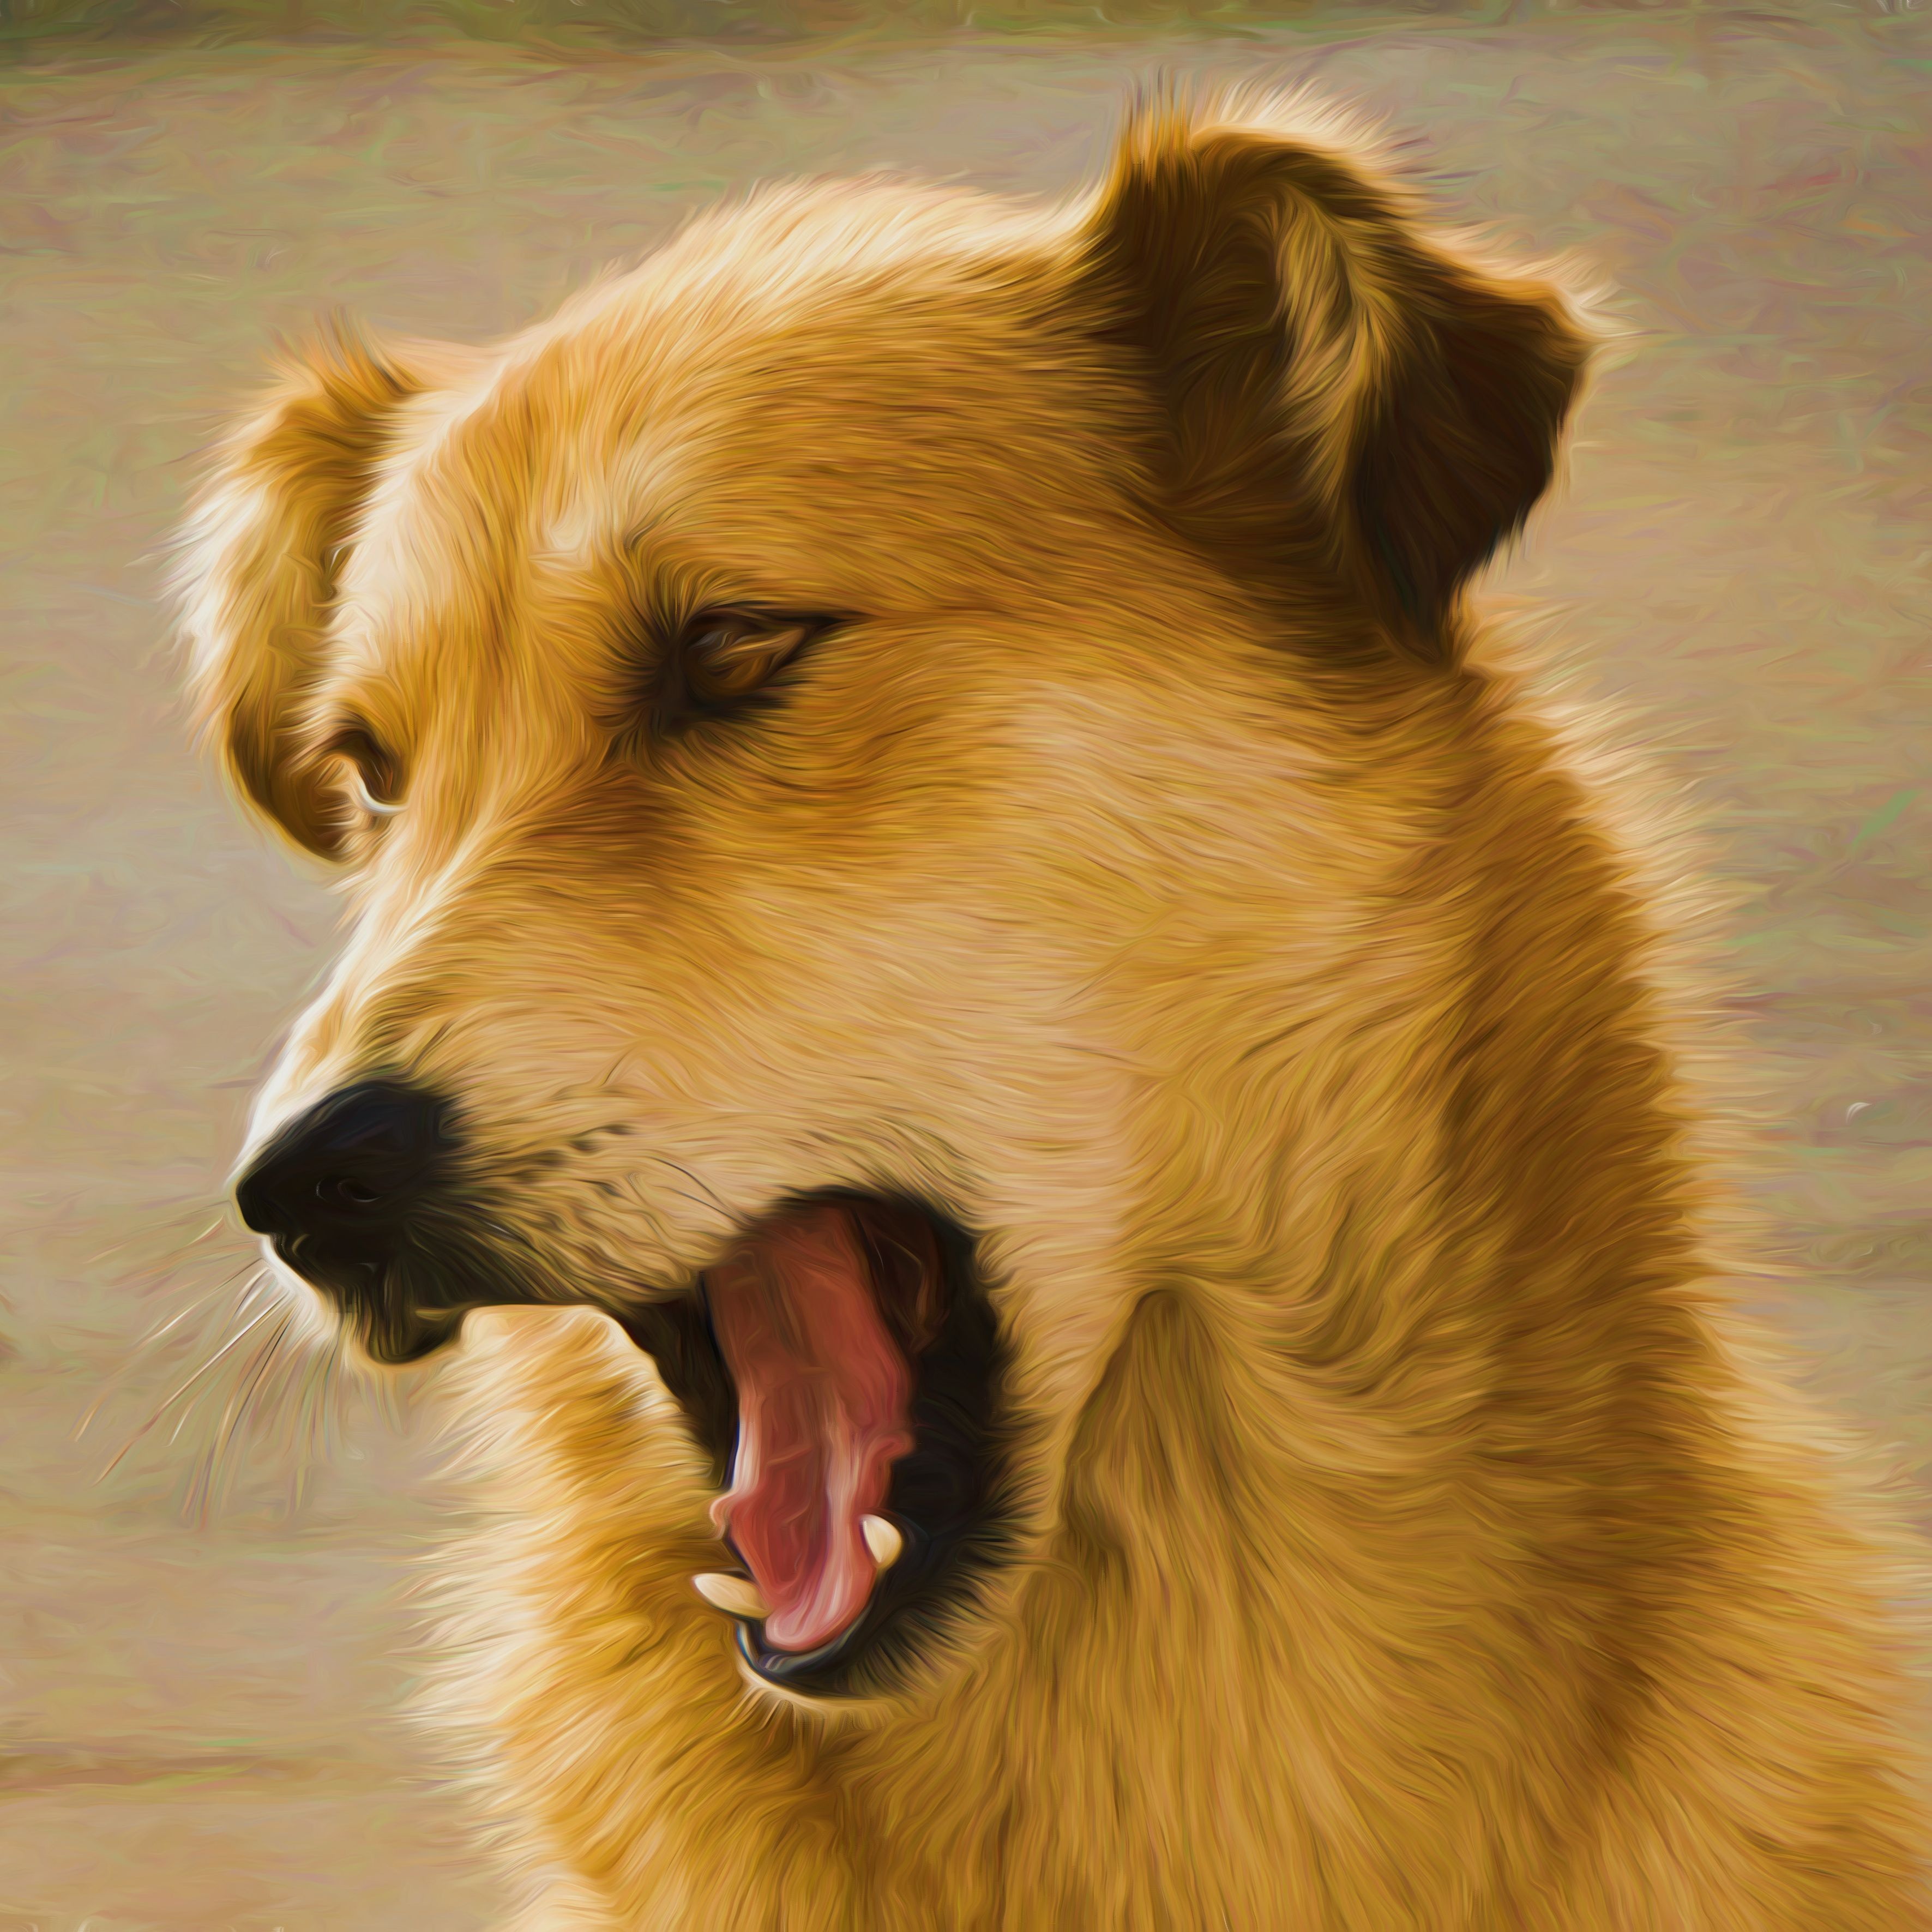 Dog done with an oil paint filter by Hans Benn